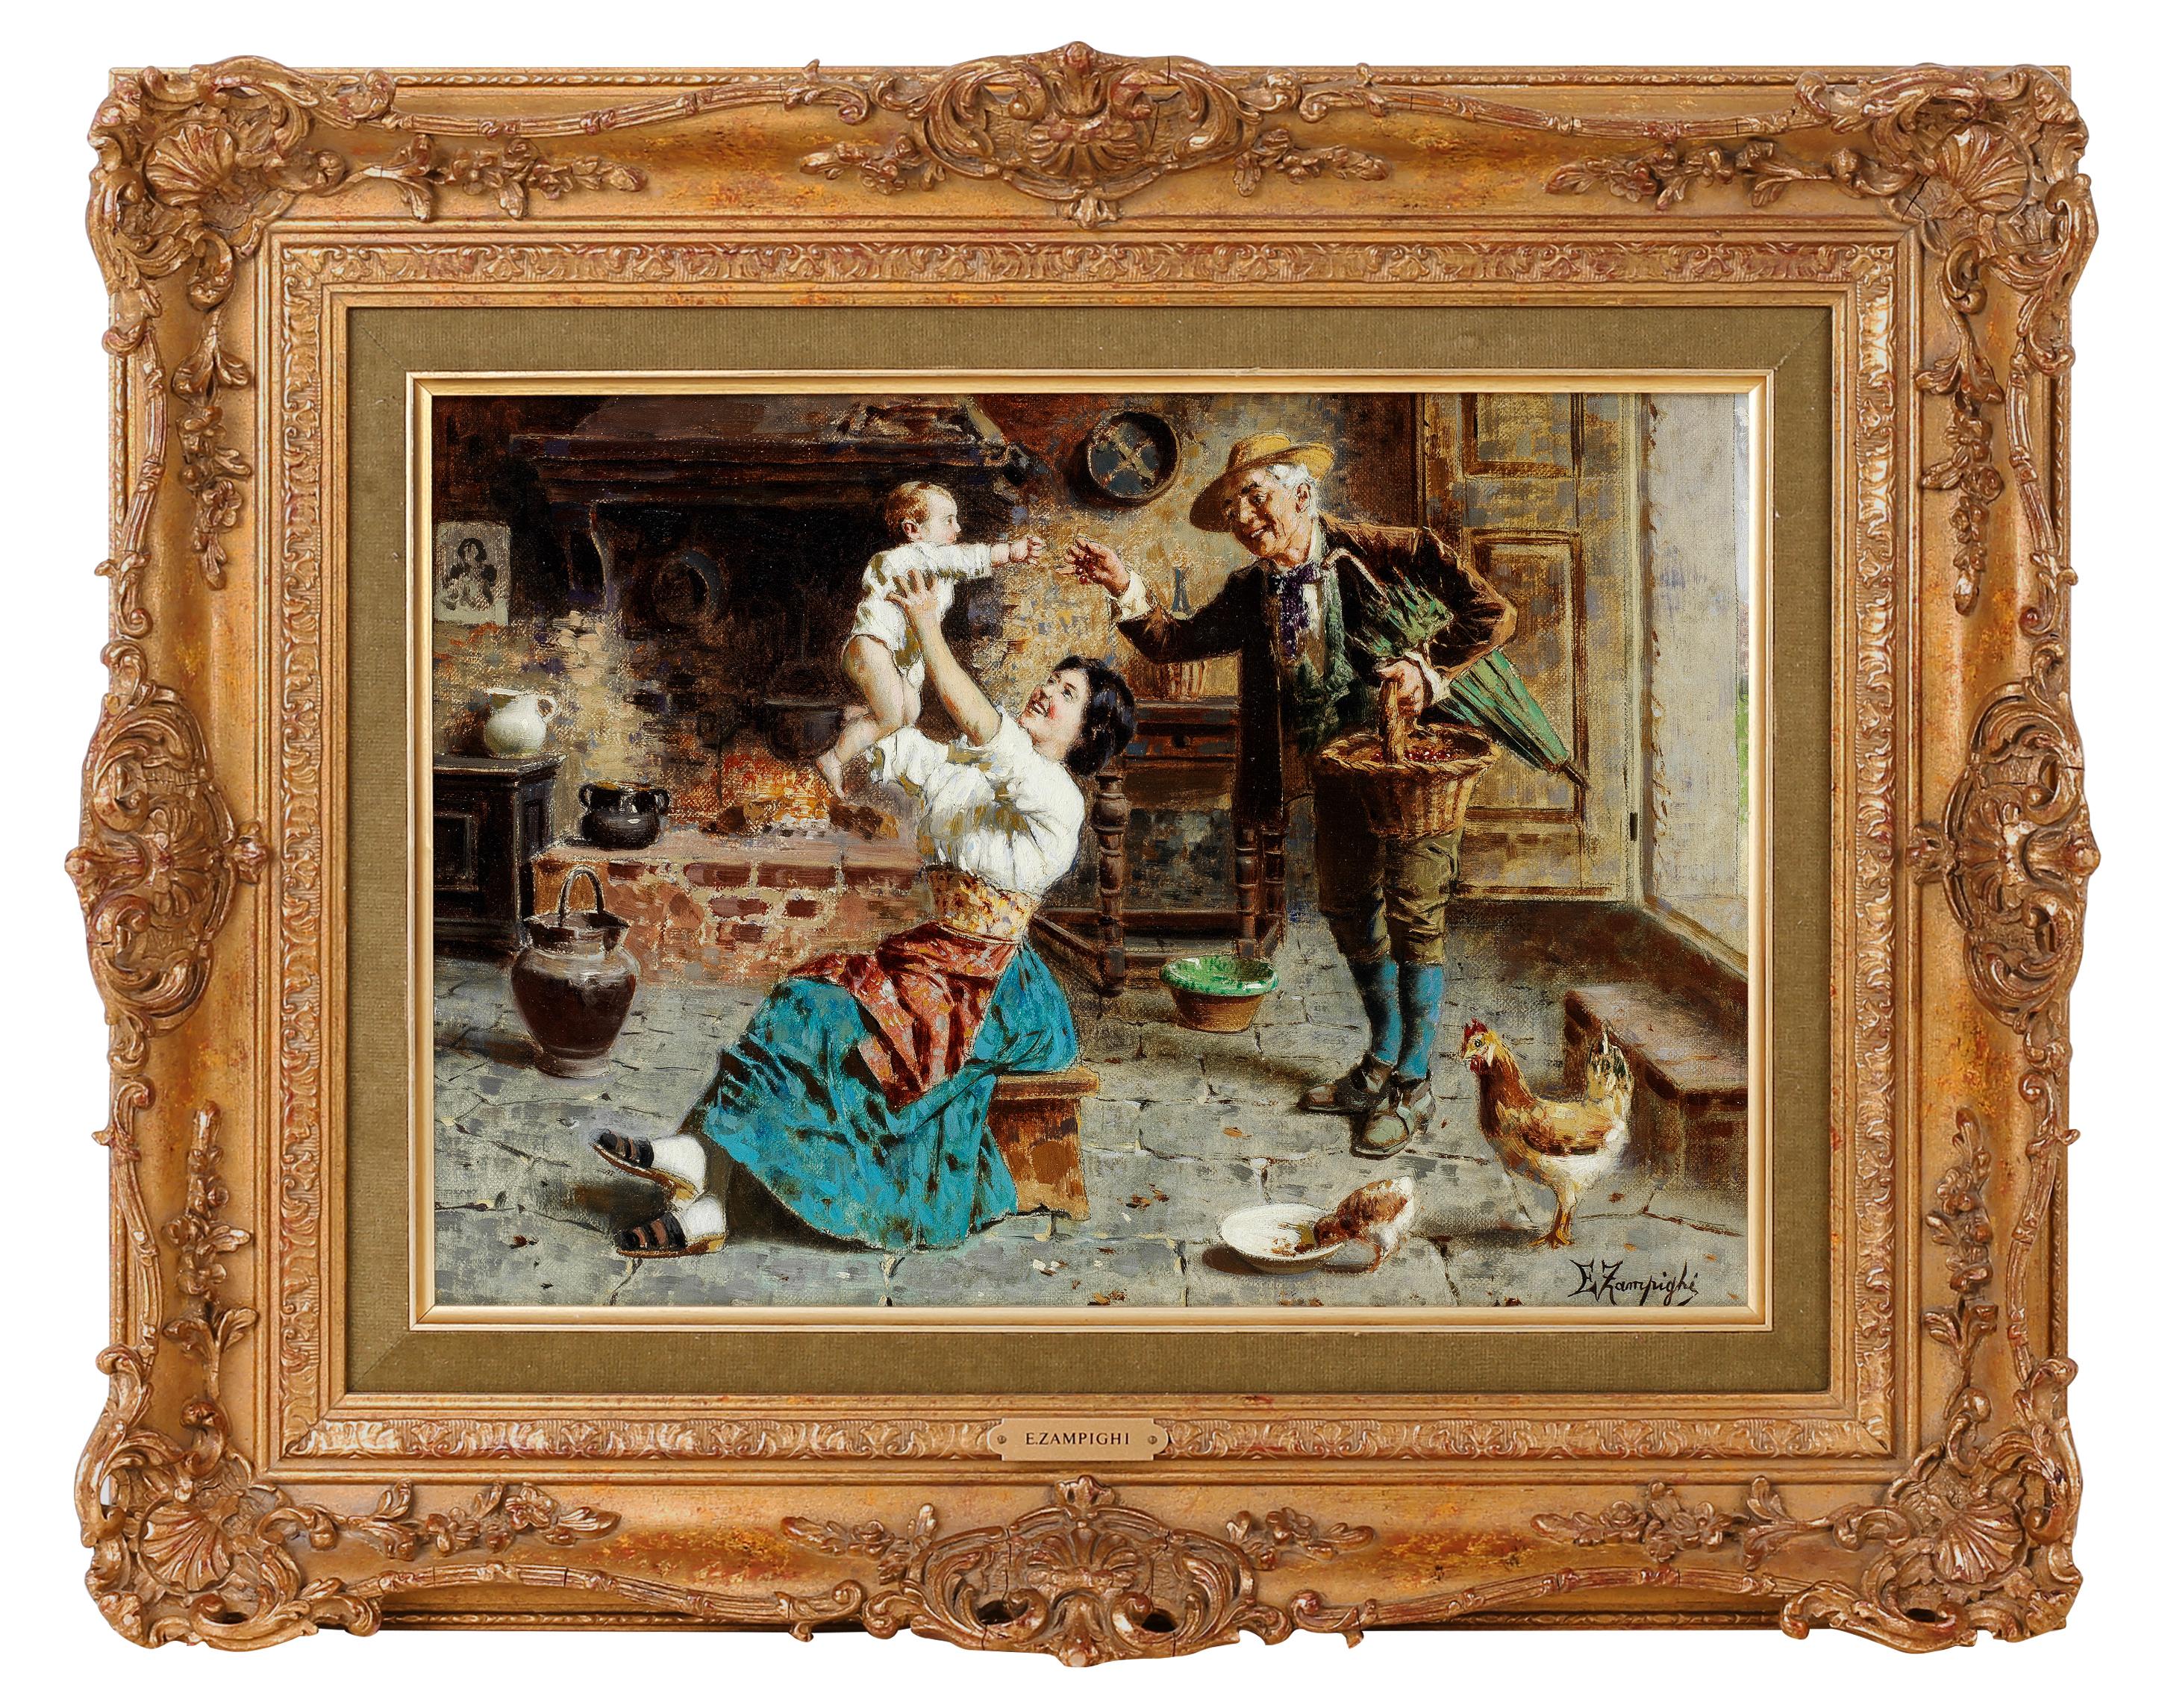 Beautiful pair of oil paintings on canvas. Works by the renowned artist Eugenio Edoardo Zampighi.

Truly rare paintings to find on the market due to their quality, number of characters, and paired execution.

The paintings depict idyllic